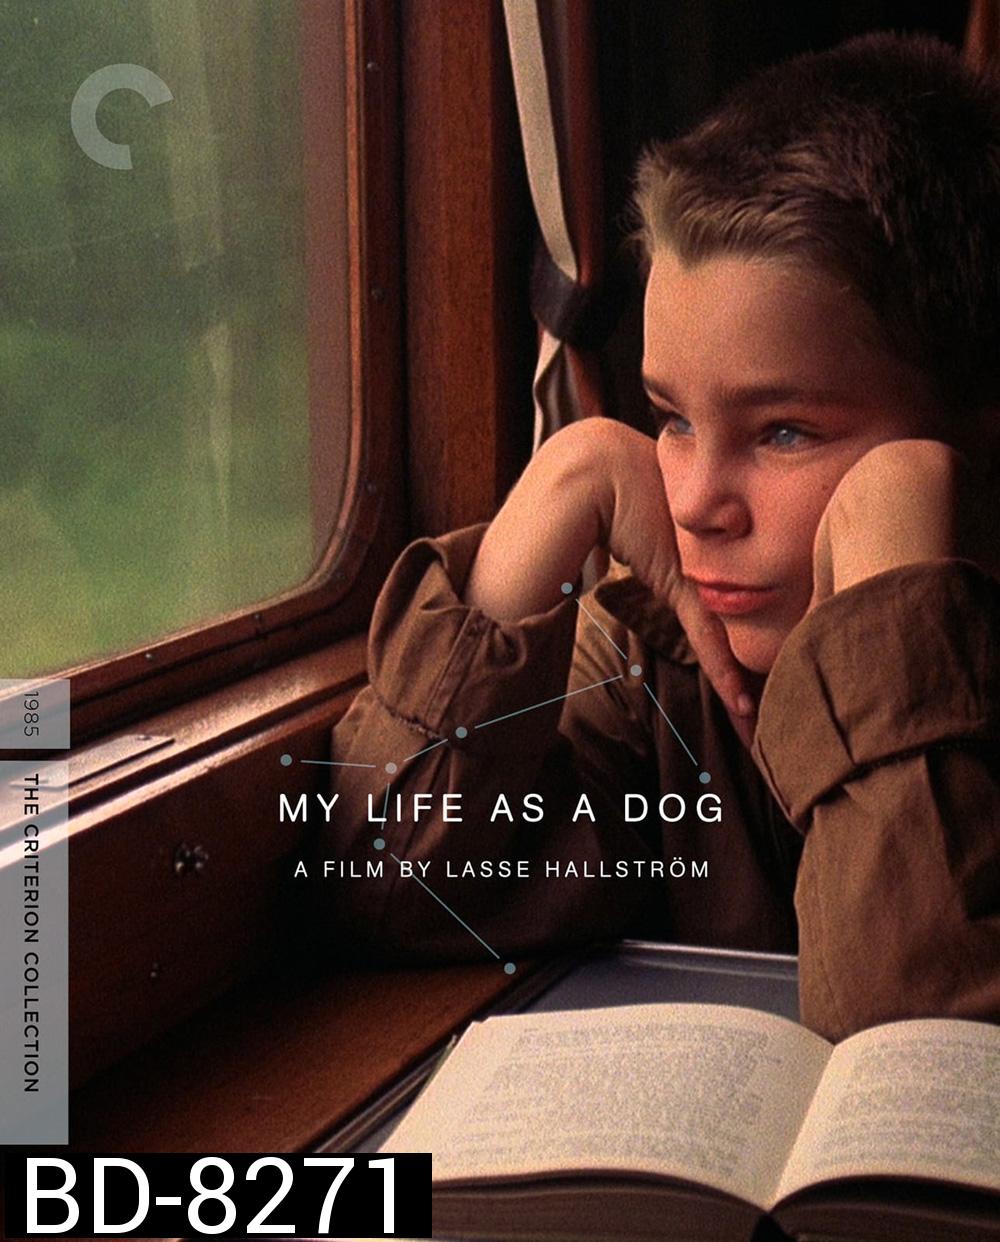 My Life As a Dog (1985)